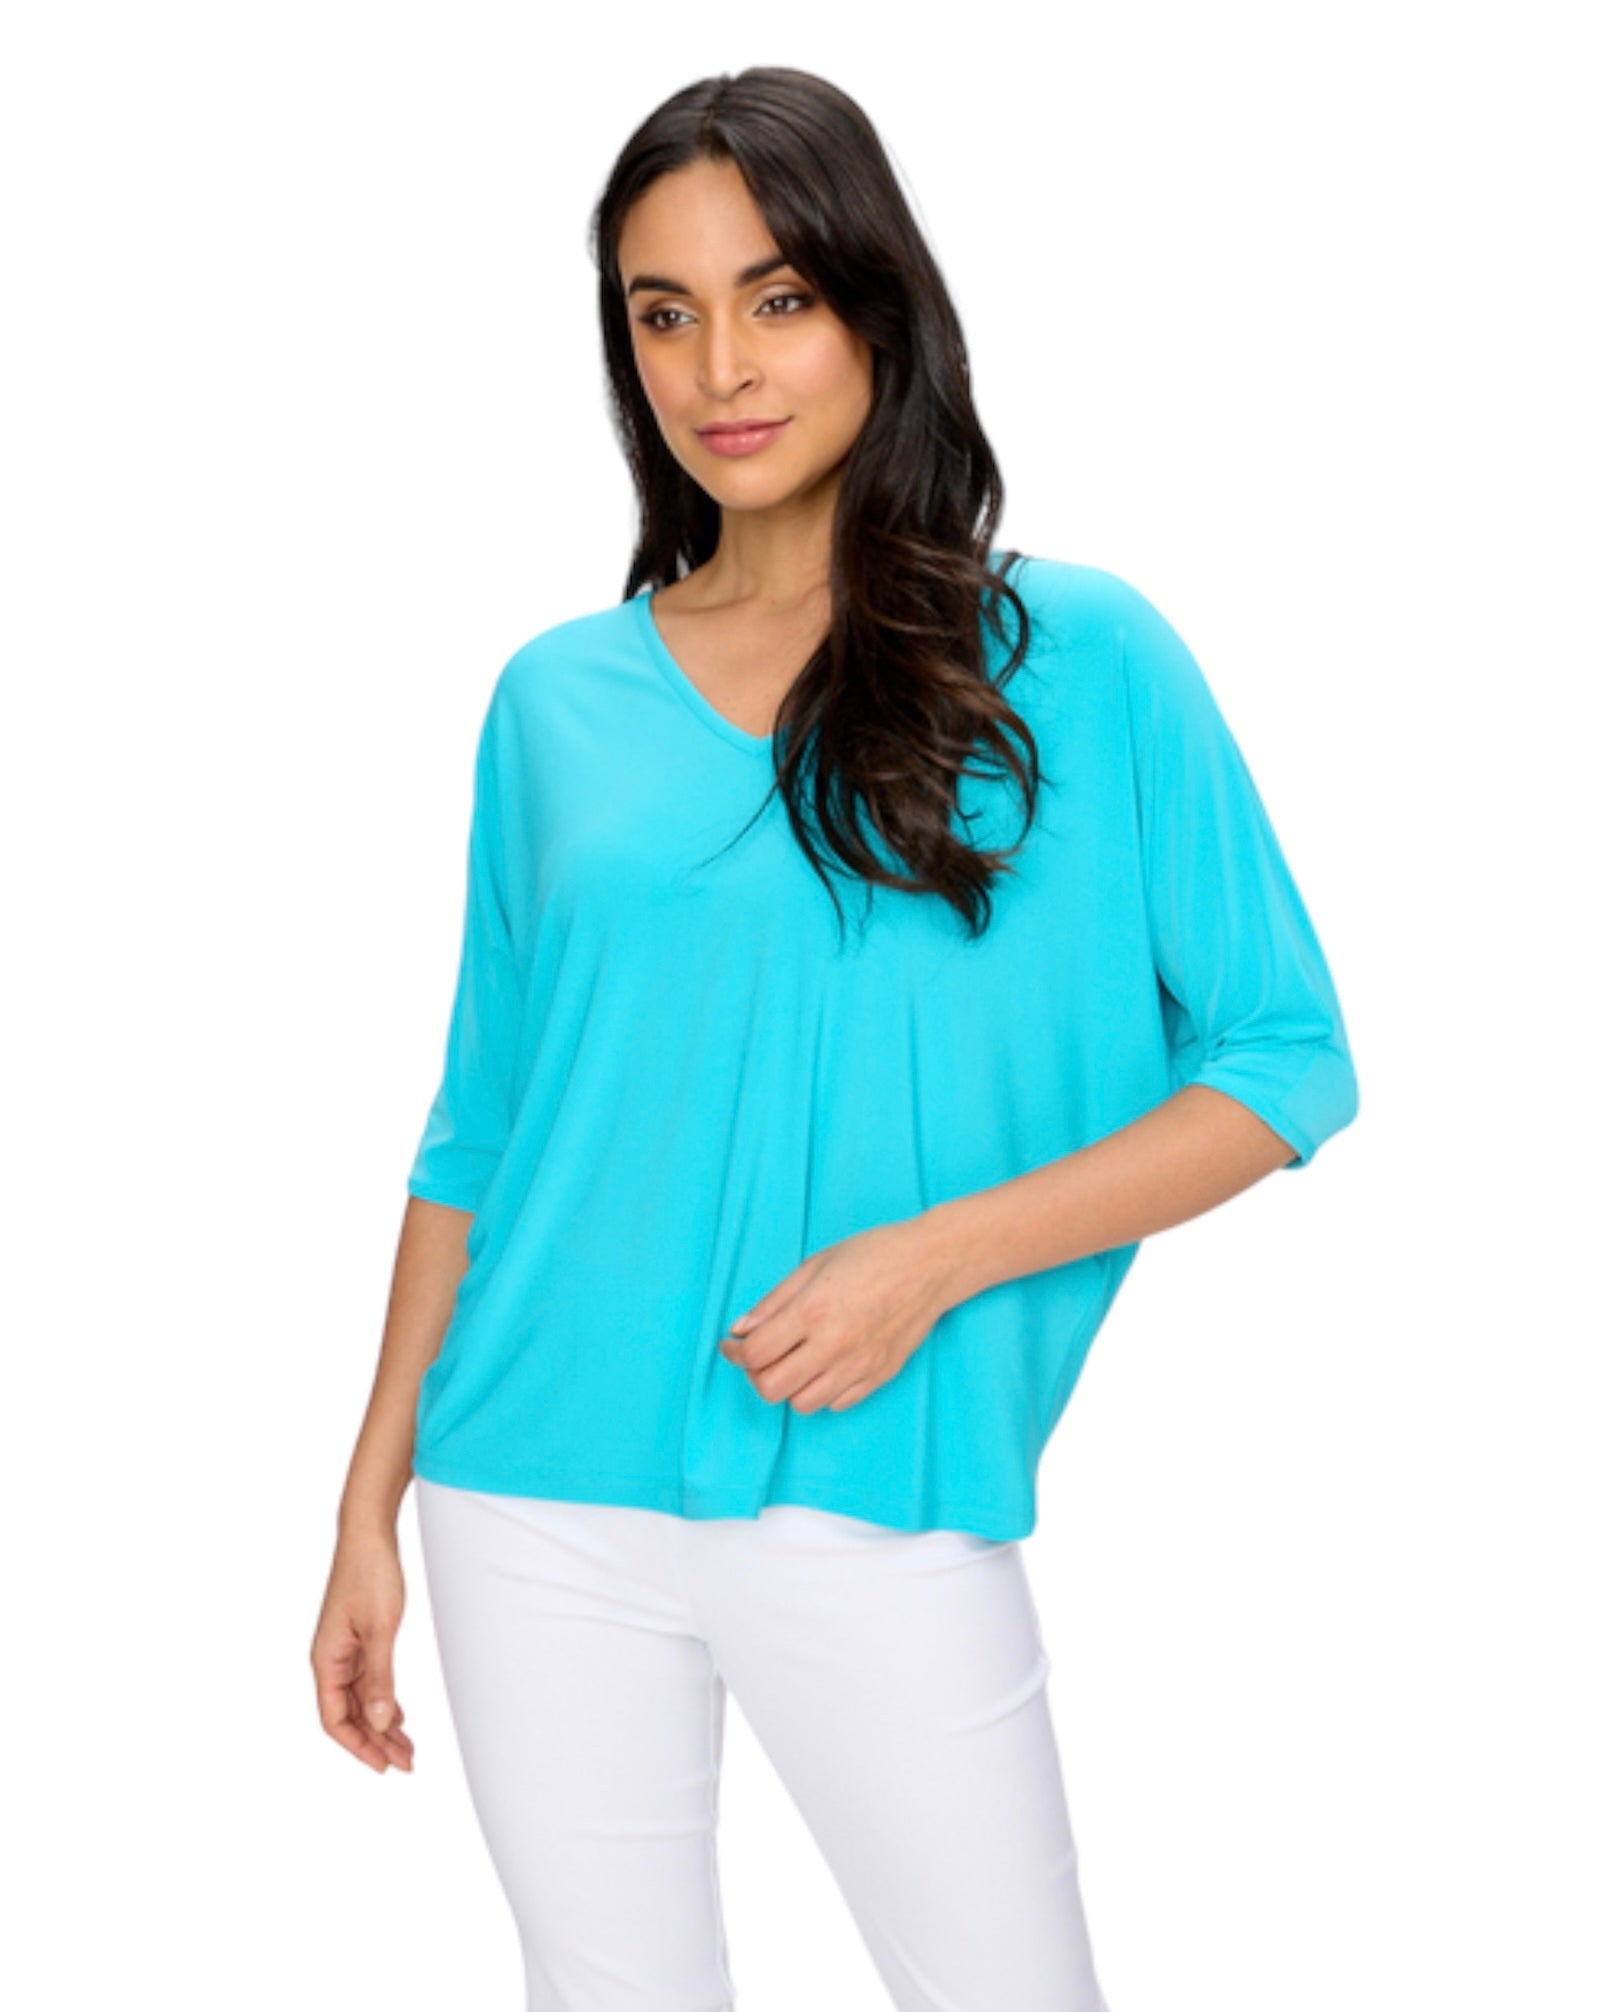 SILKY KNIT BOXY TOP - Sea View Blue